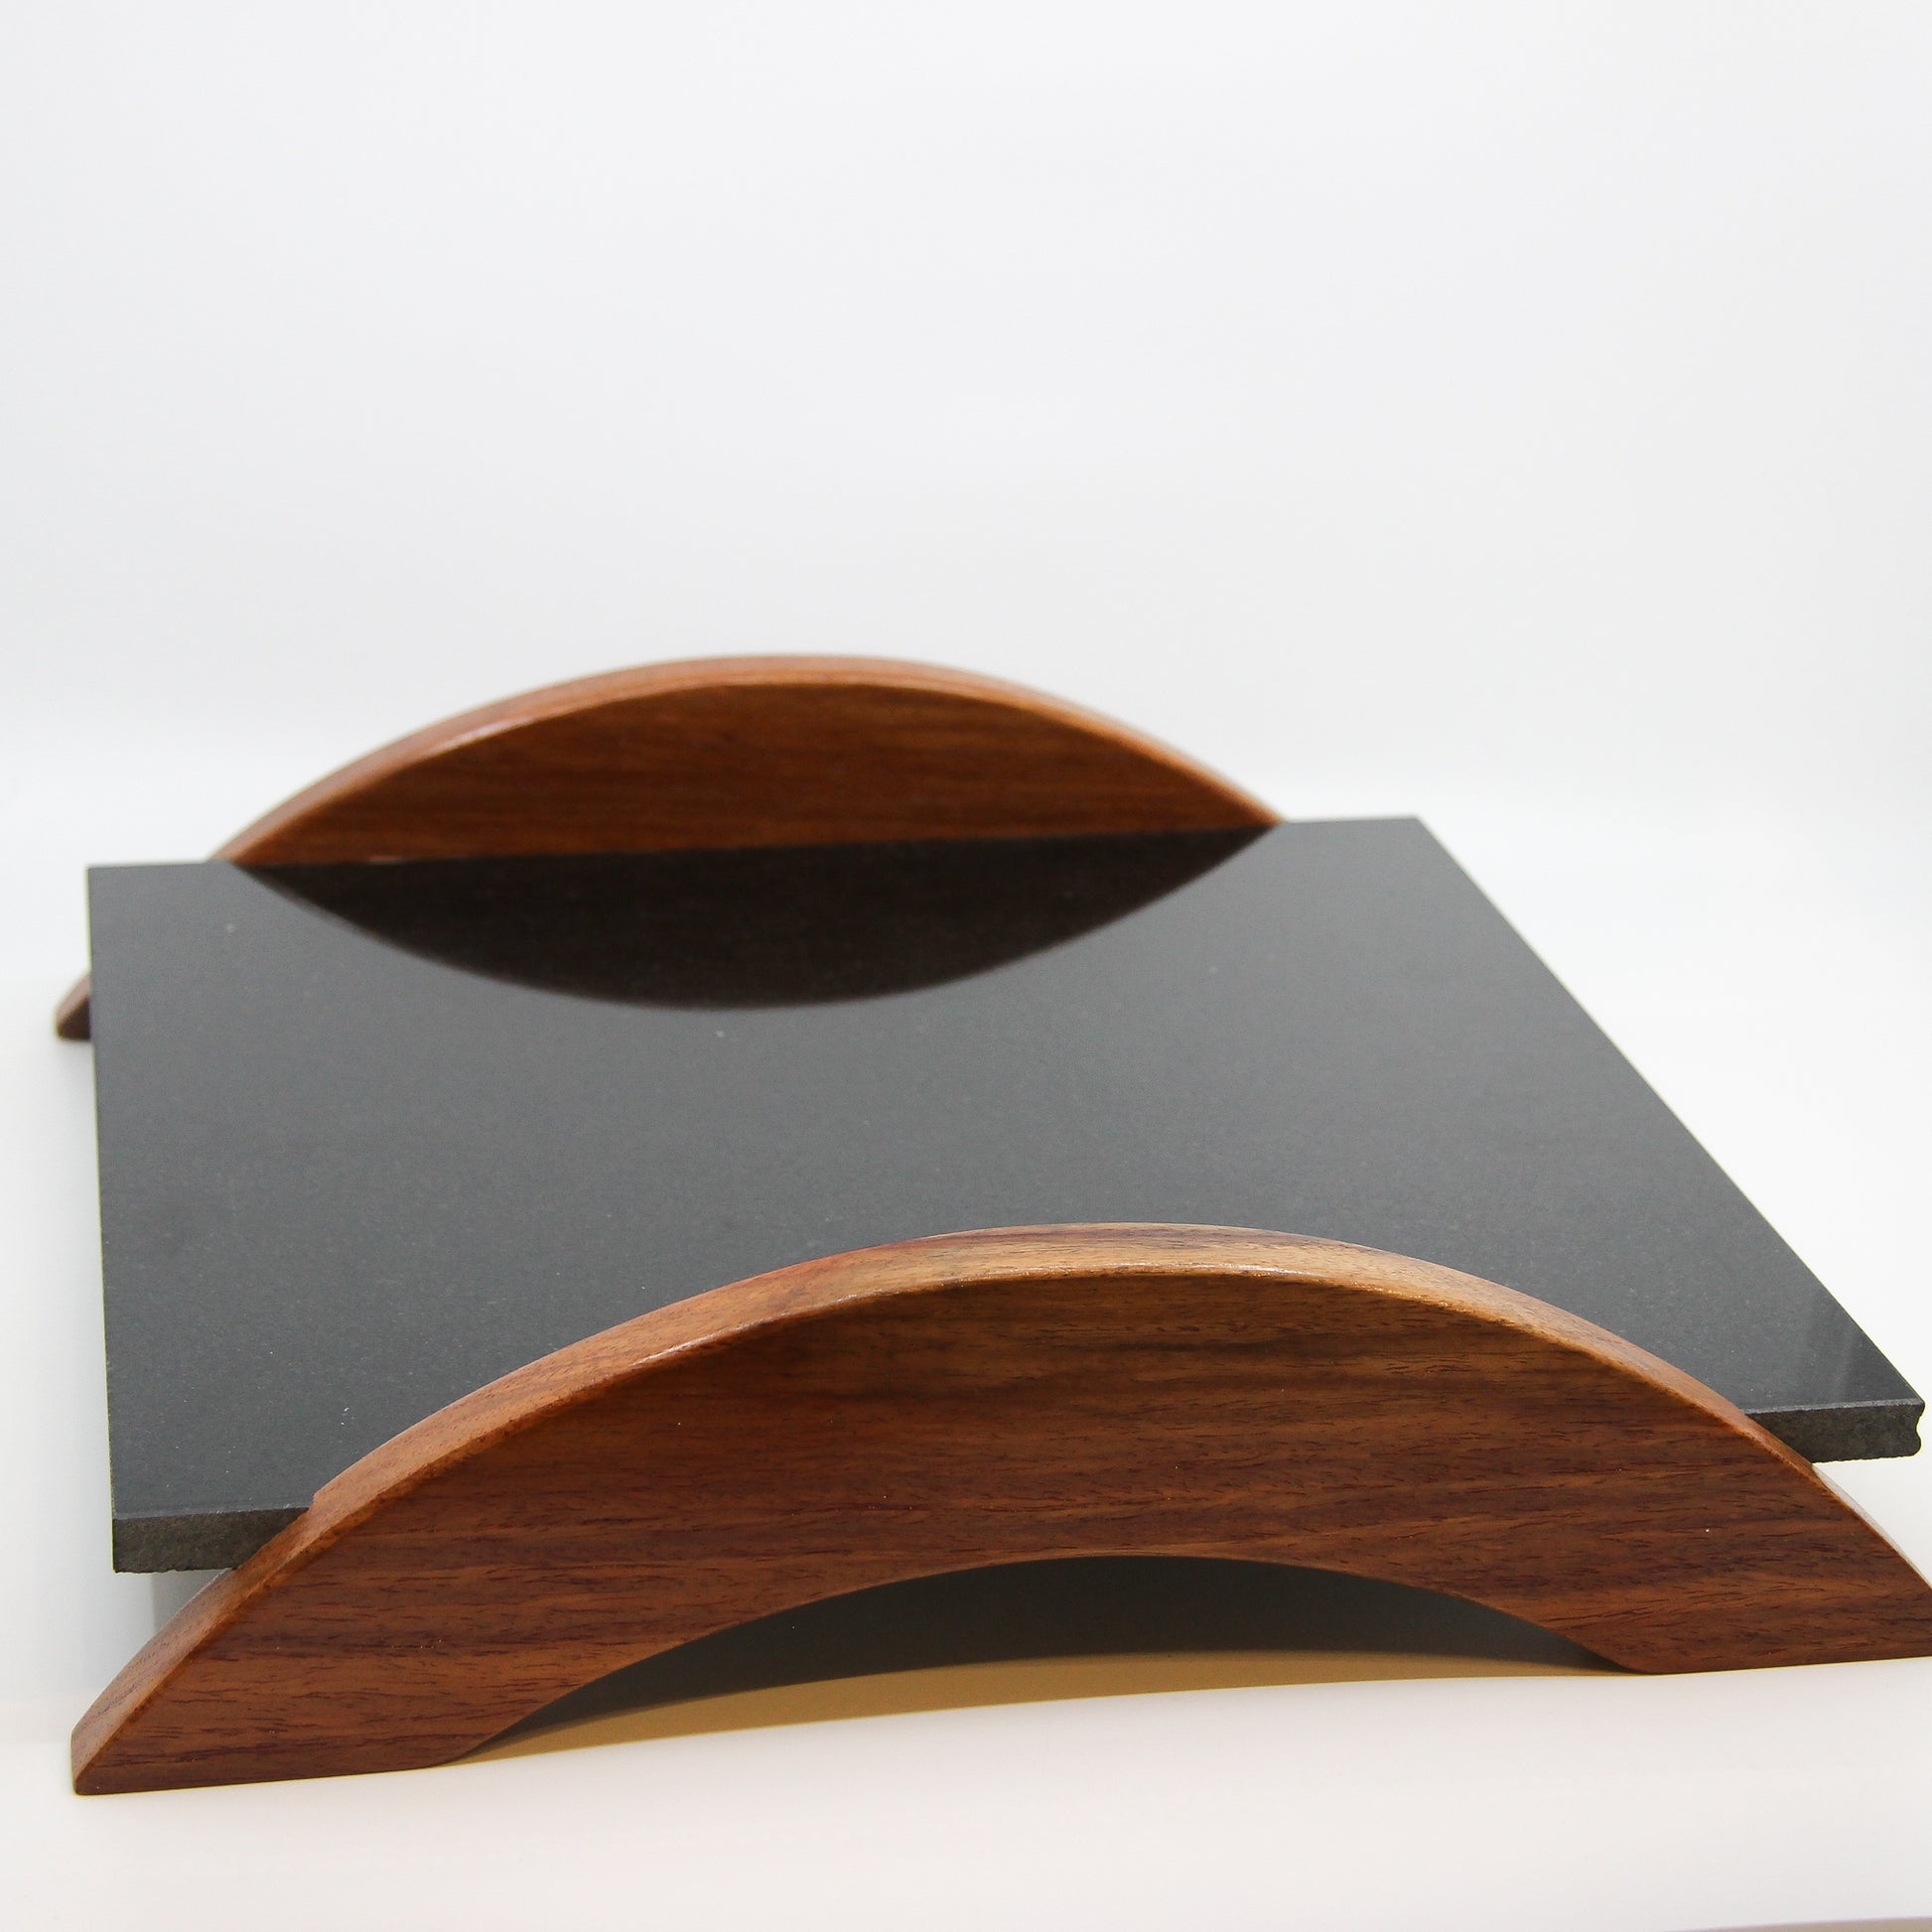 Shiny black stone serving tray with brown wooden handles